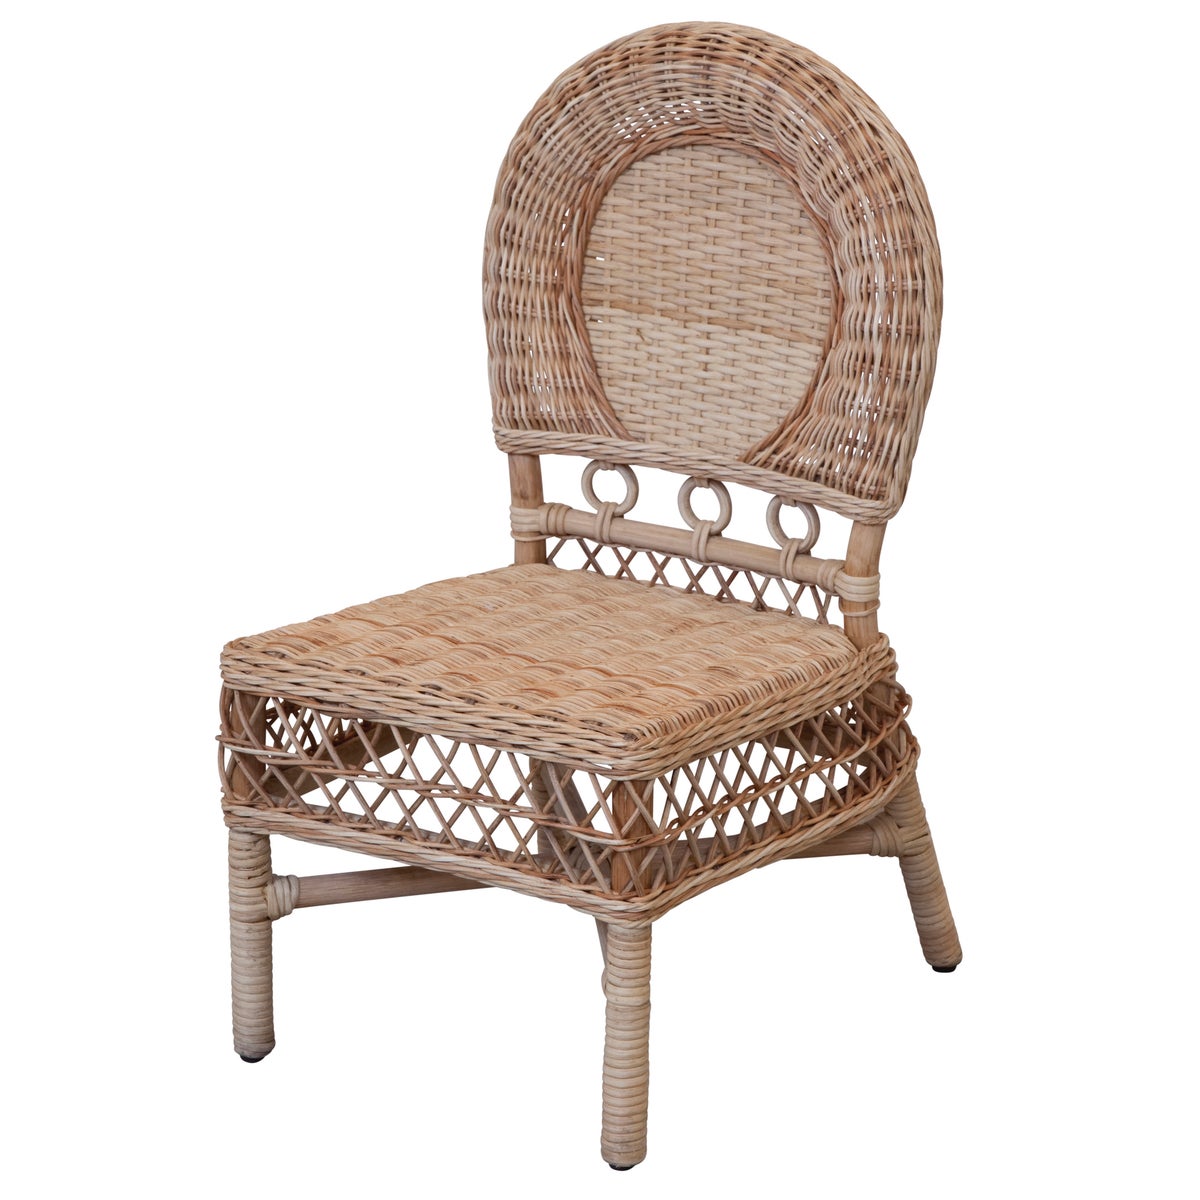 Child's Wicker Play Chair